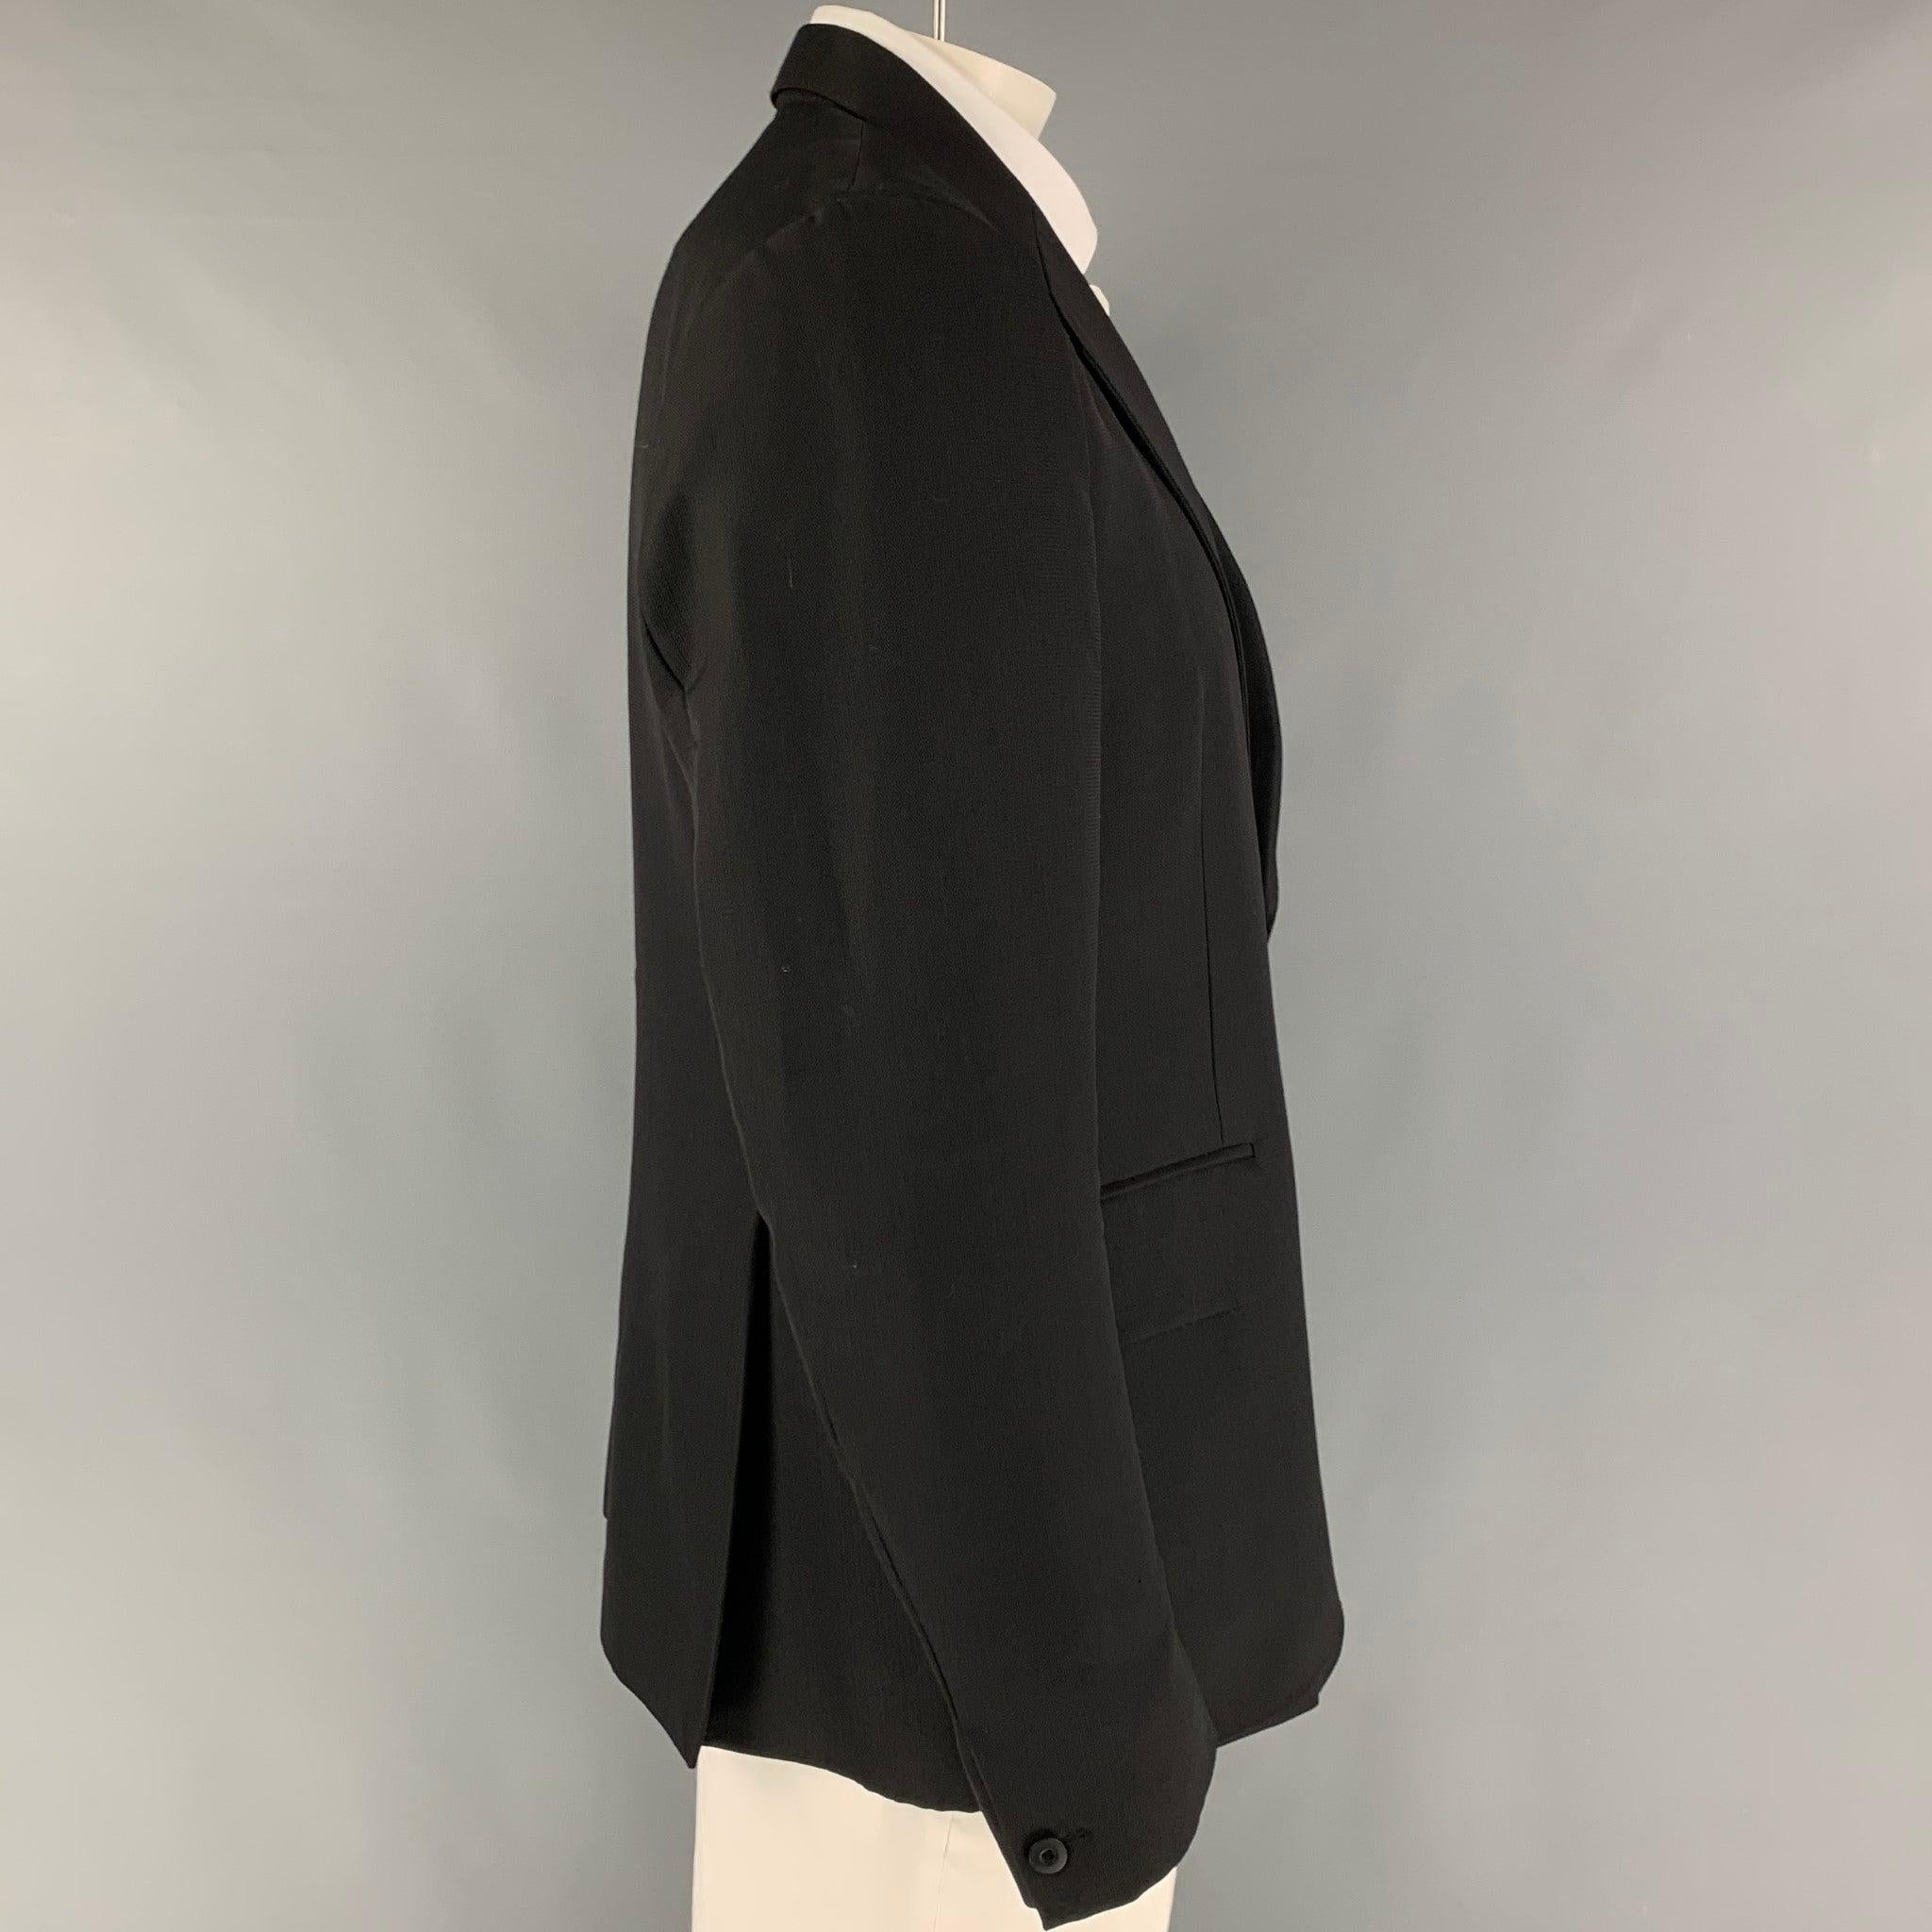 OUR LEGACY sport coat comes in a black virgin wool with a full liner featuring a notch lapel, flap pockets, double back vent, and a double button closure. Made in Portugal.
Very Good
Pre-Owned Condition. 

Marked:   54 

Measurements: 
 
Shoulder: